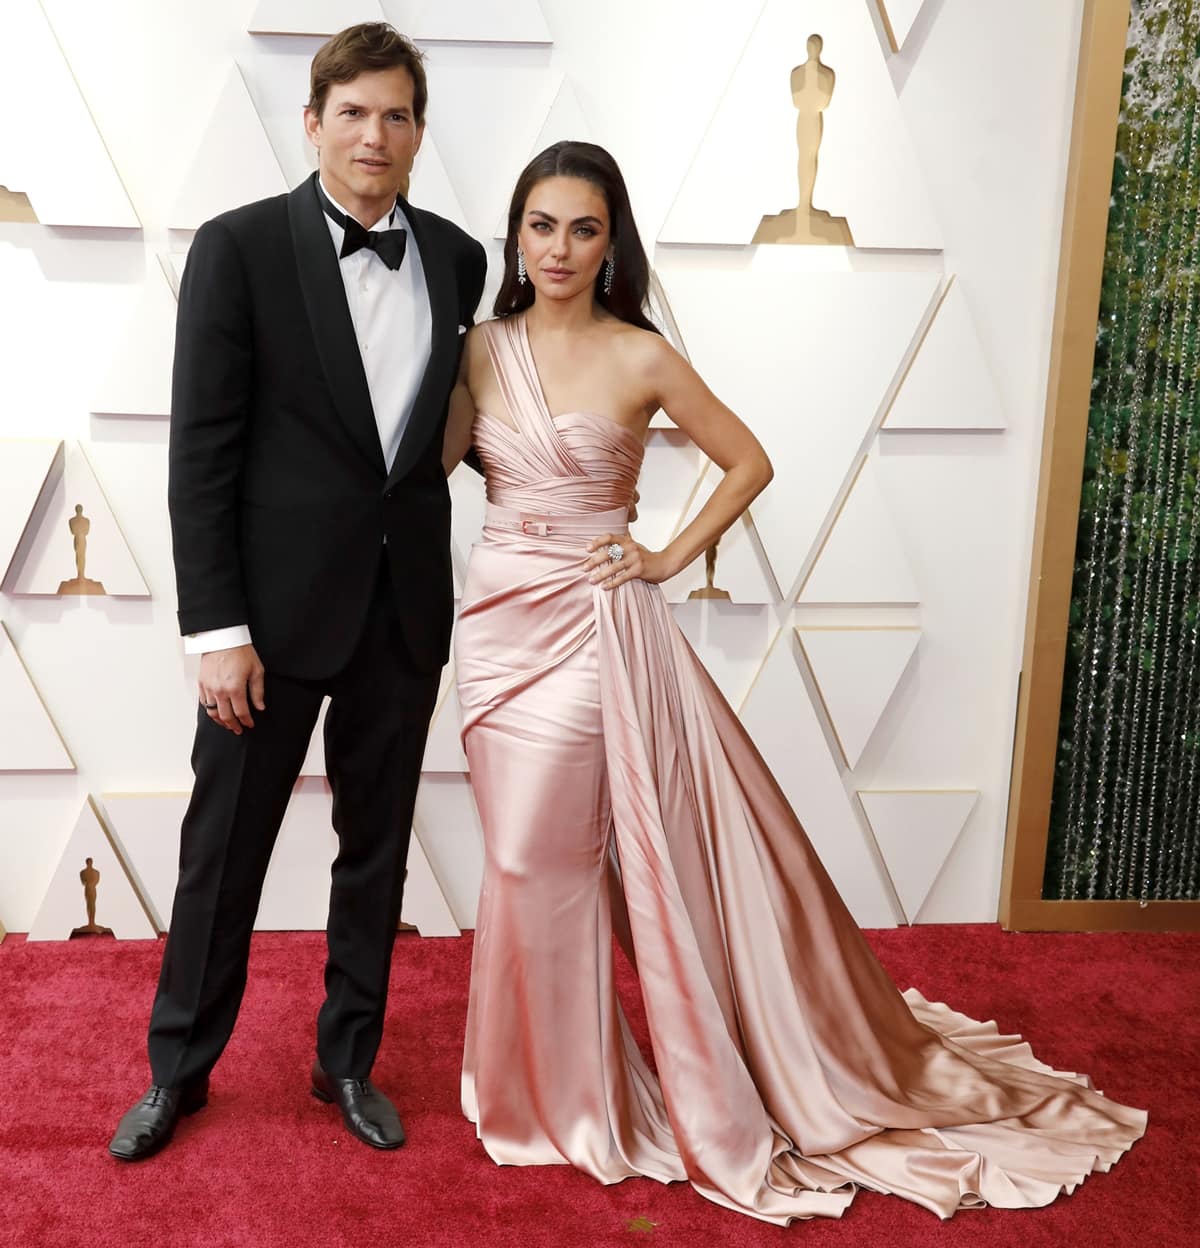 Ashton Kutcher in a black tuxedo and Mila Kunis in a light pink belted Zuhair Murad Spring 2022 Couture dress attend the 94th Annual Academy Awards